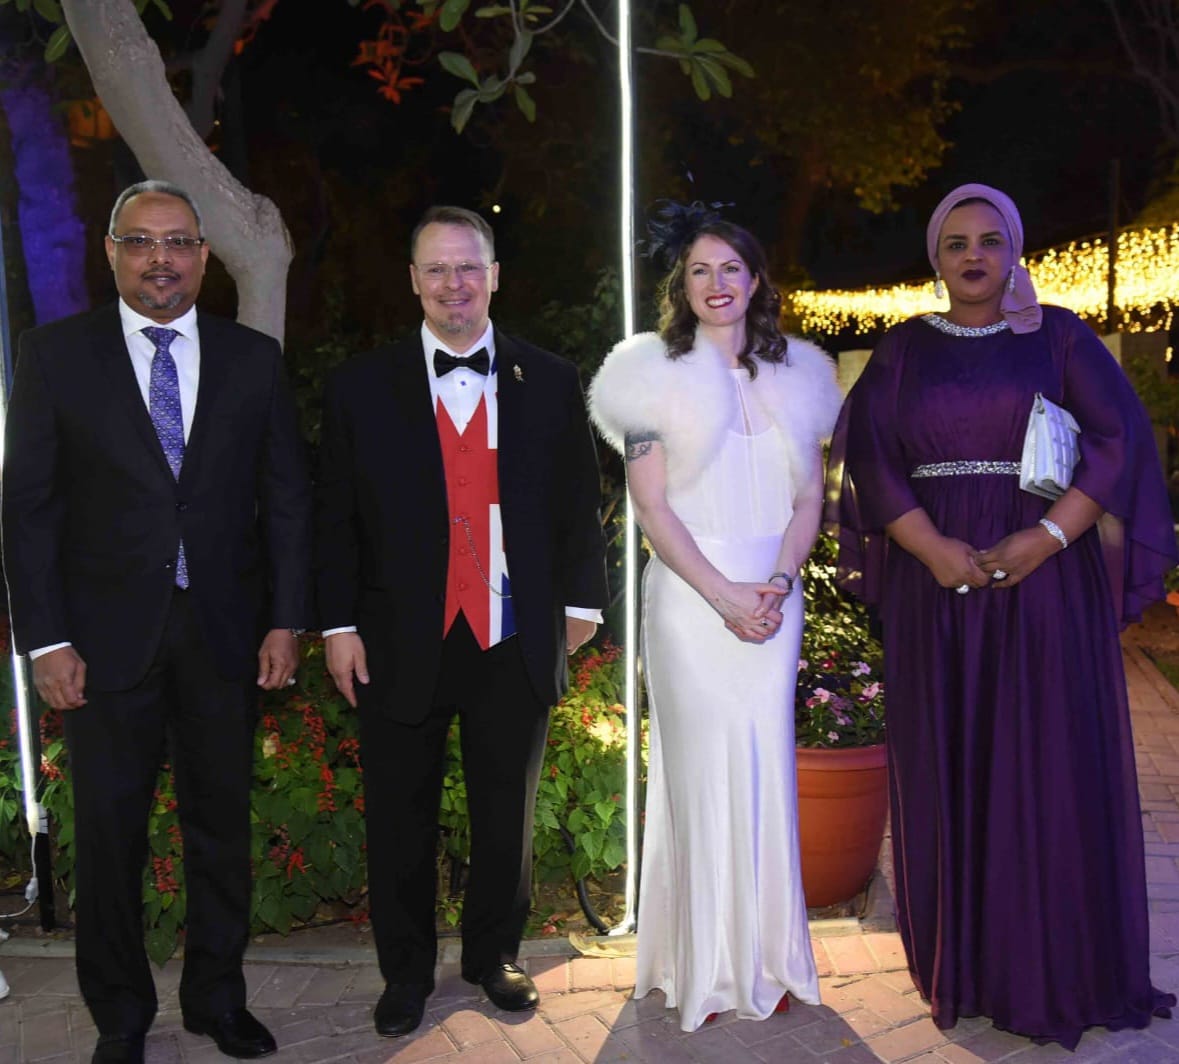 Participation of His Excellency the Ambassador in the celebration of the Royal Coronation